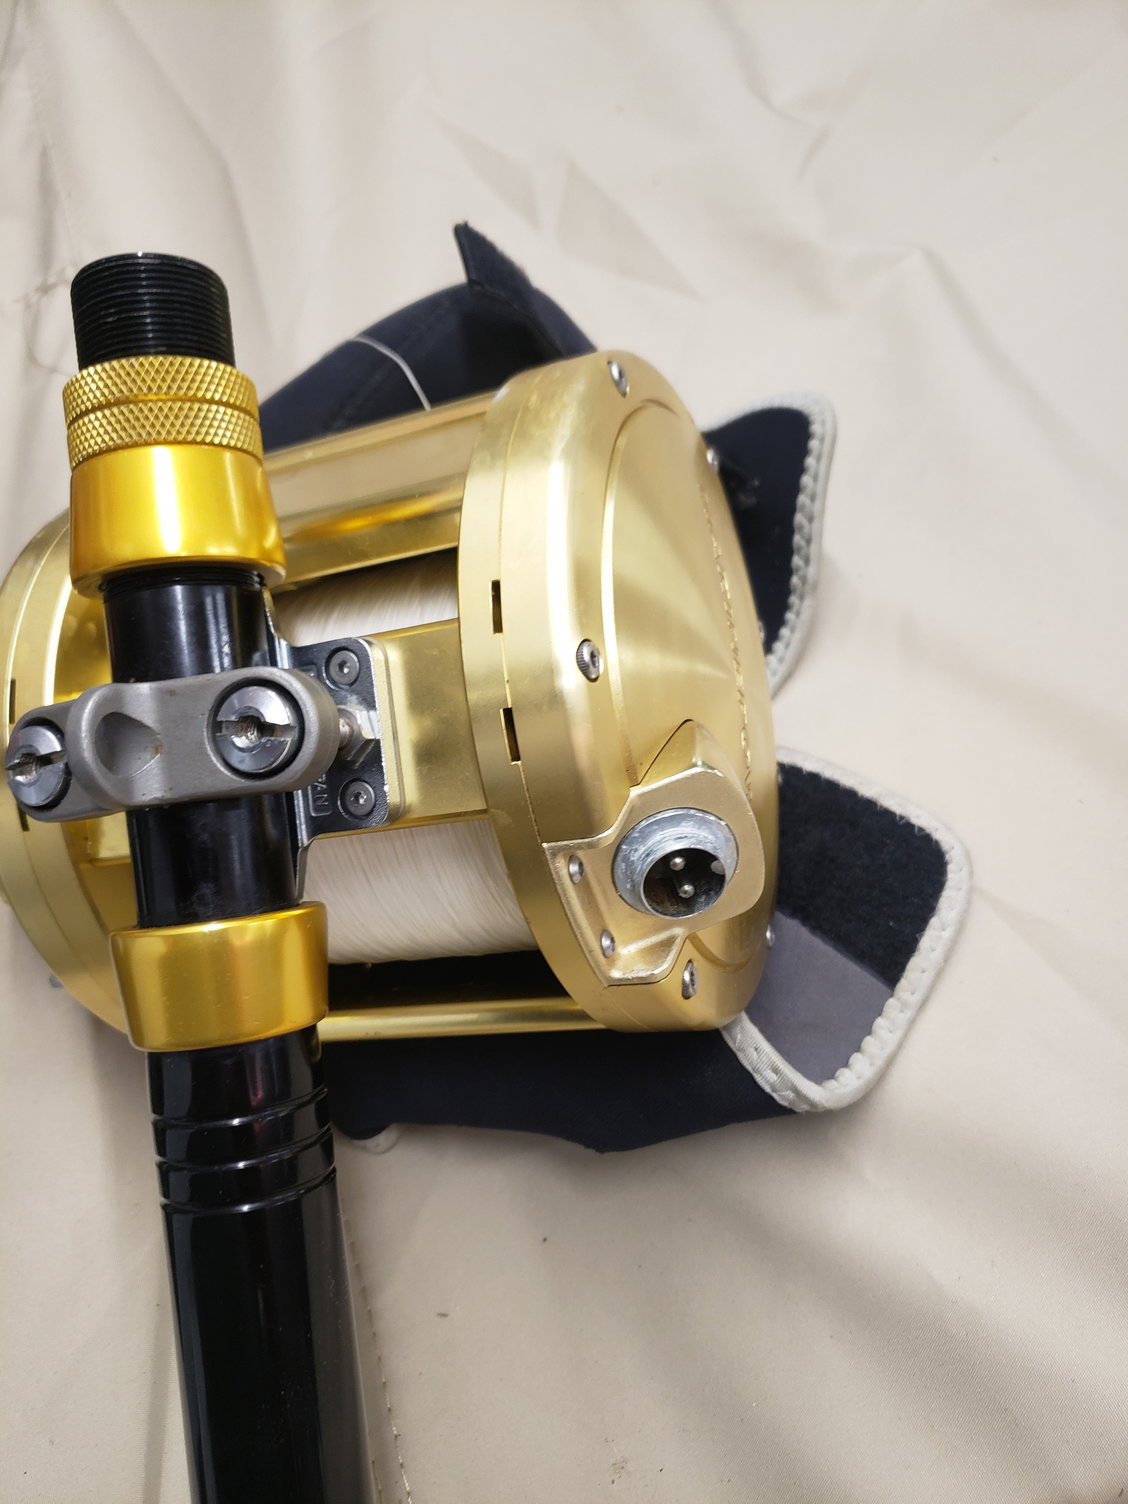 Electric Reels for sale - The Hull Truth - Boating and Fishing Forum